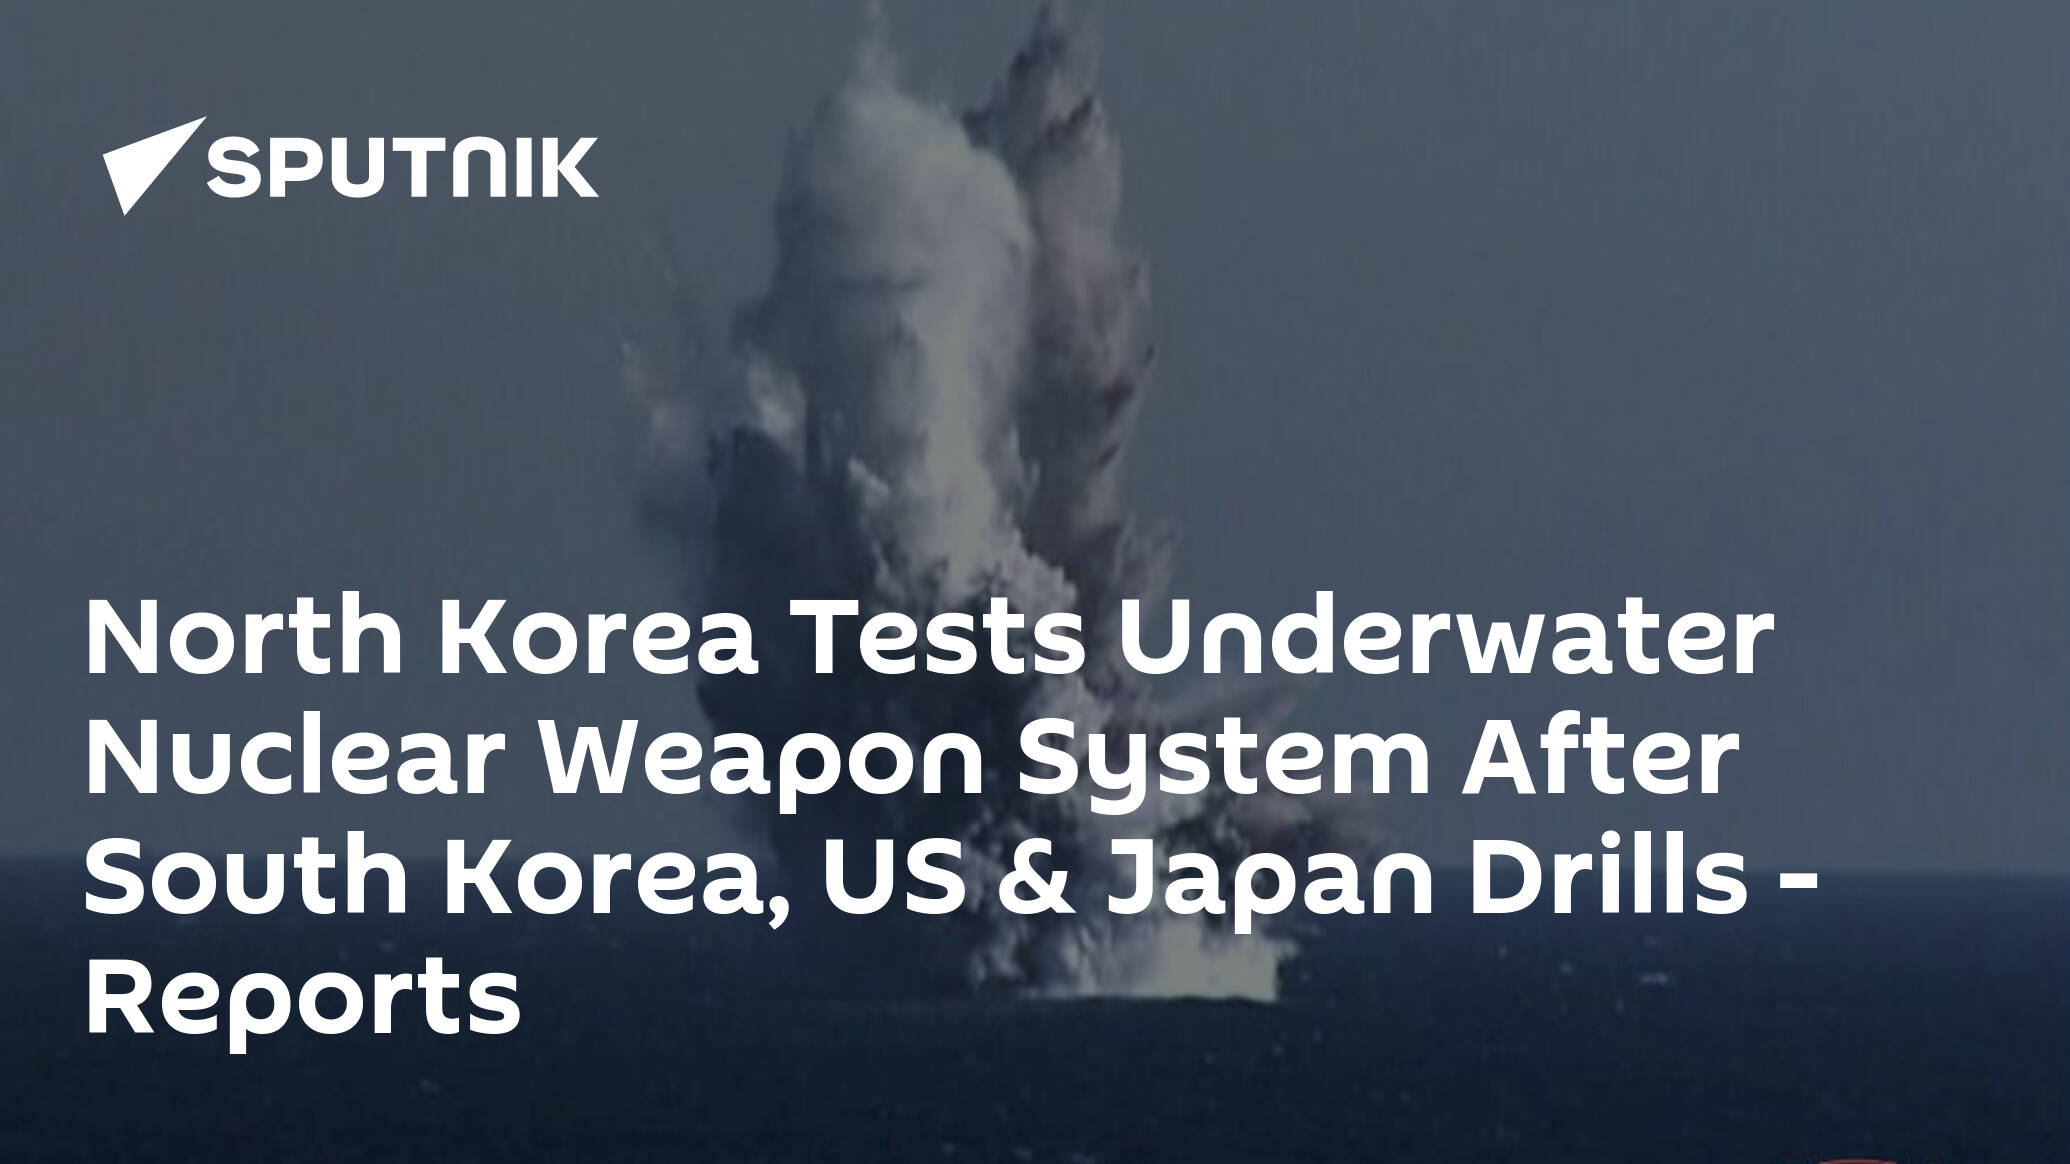 North Korea Tests Underwater Nuclear Weapon System After South Korea, US & Japan Drills – Reports